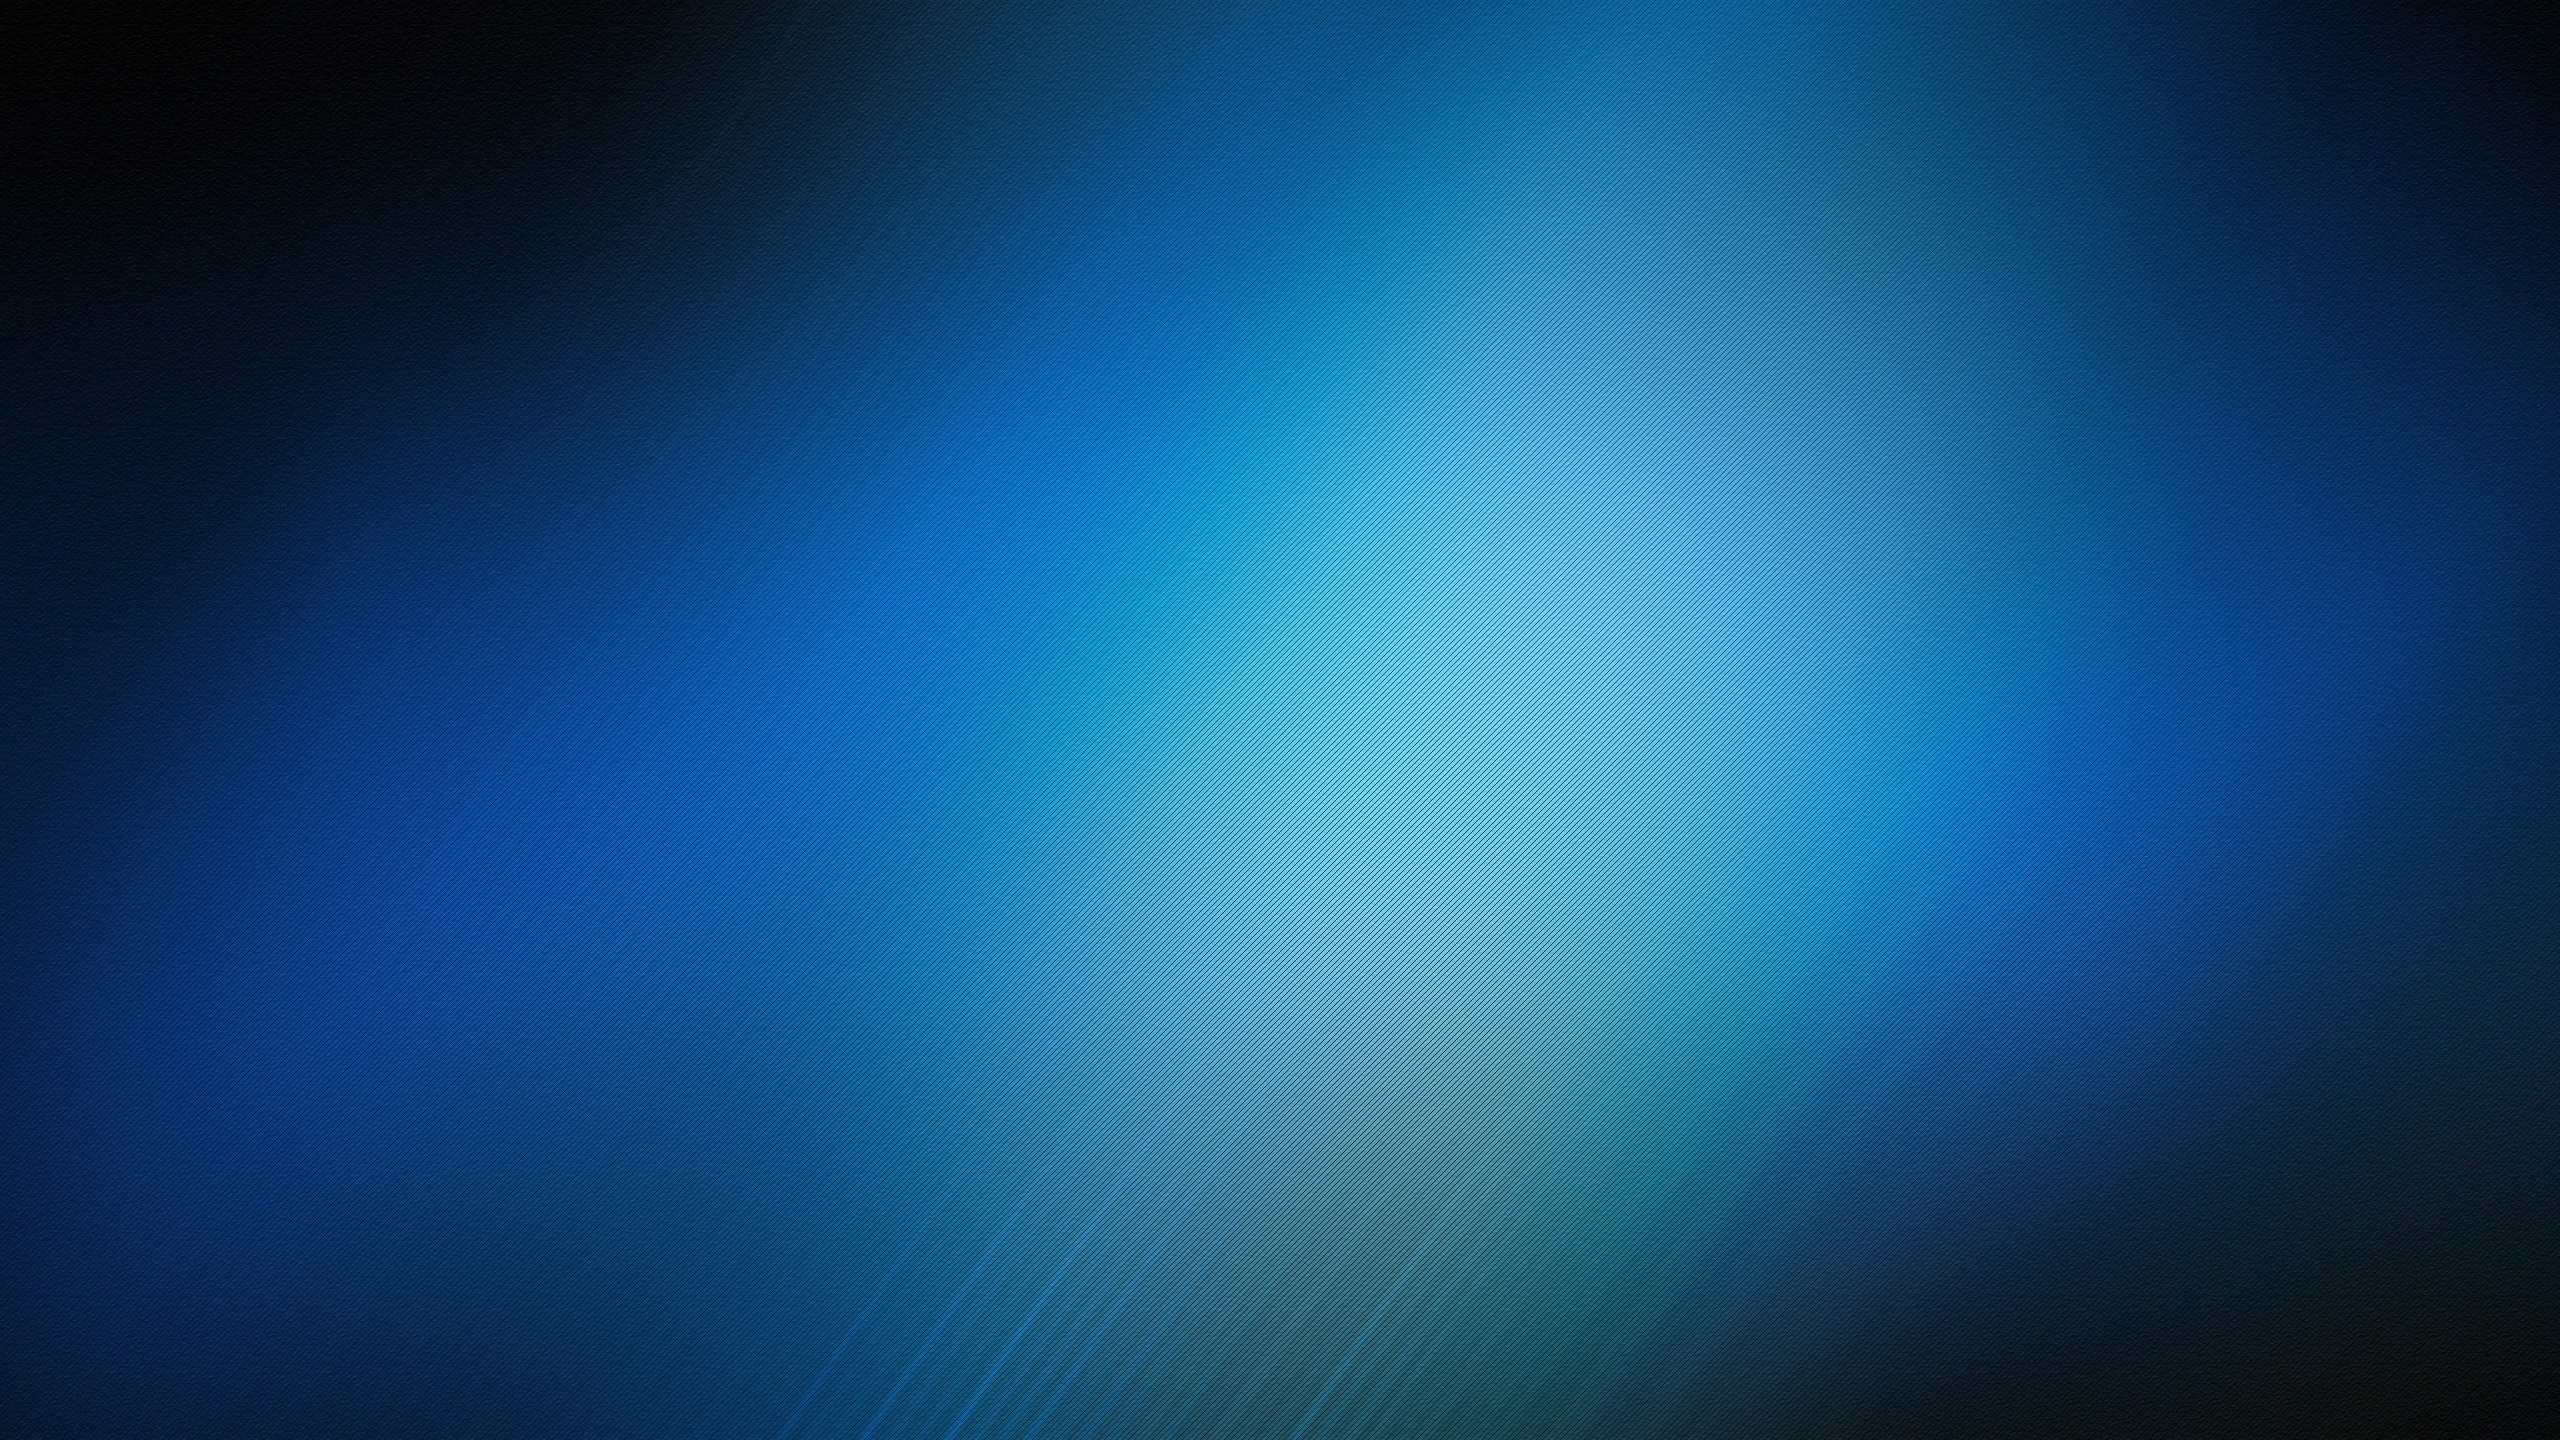 Blue Textures And Light Channel Cover